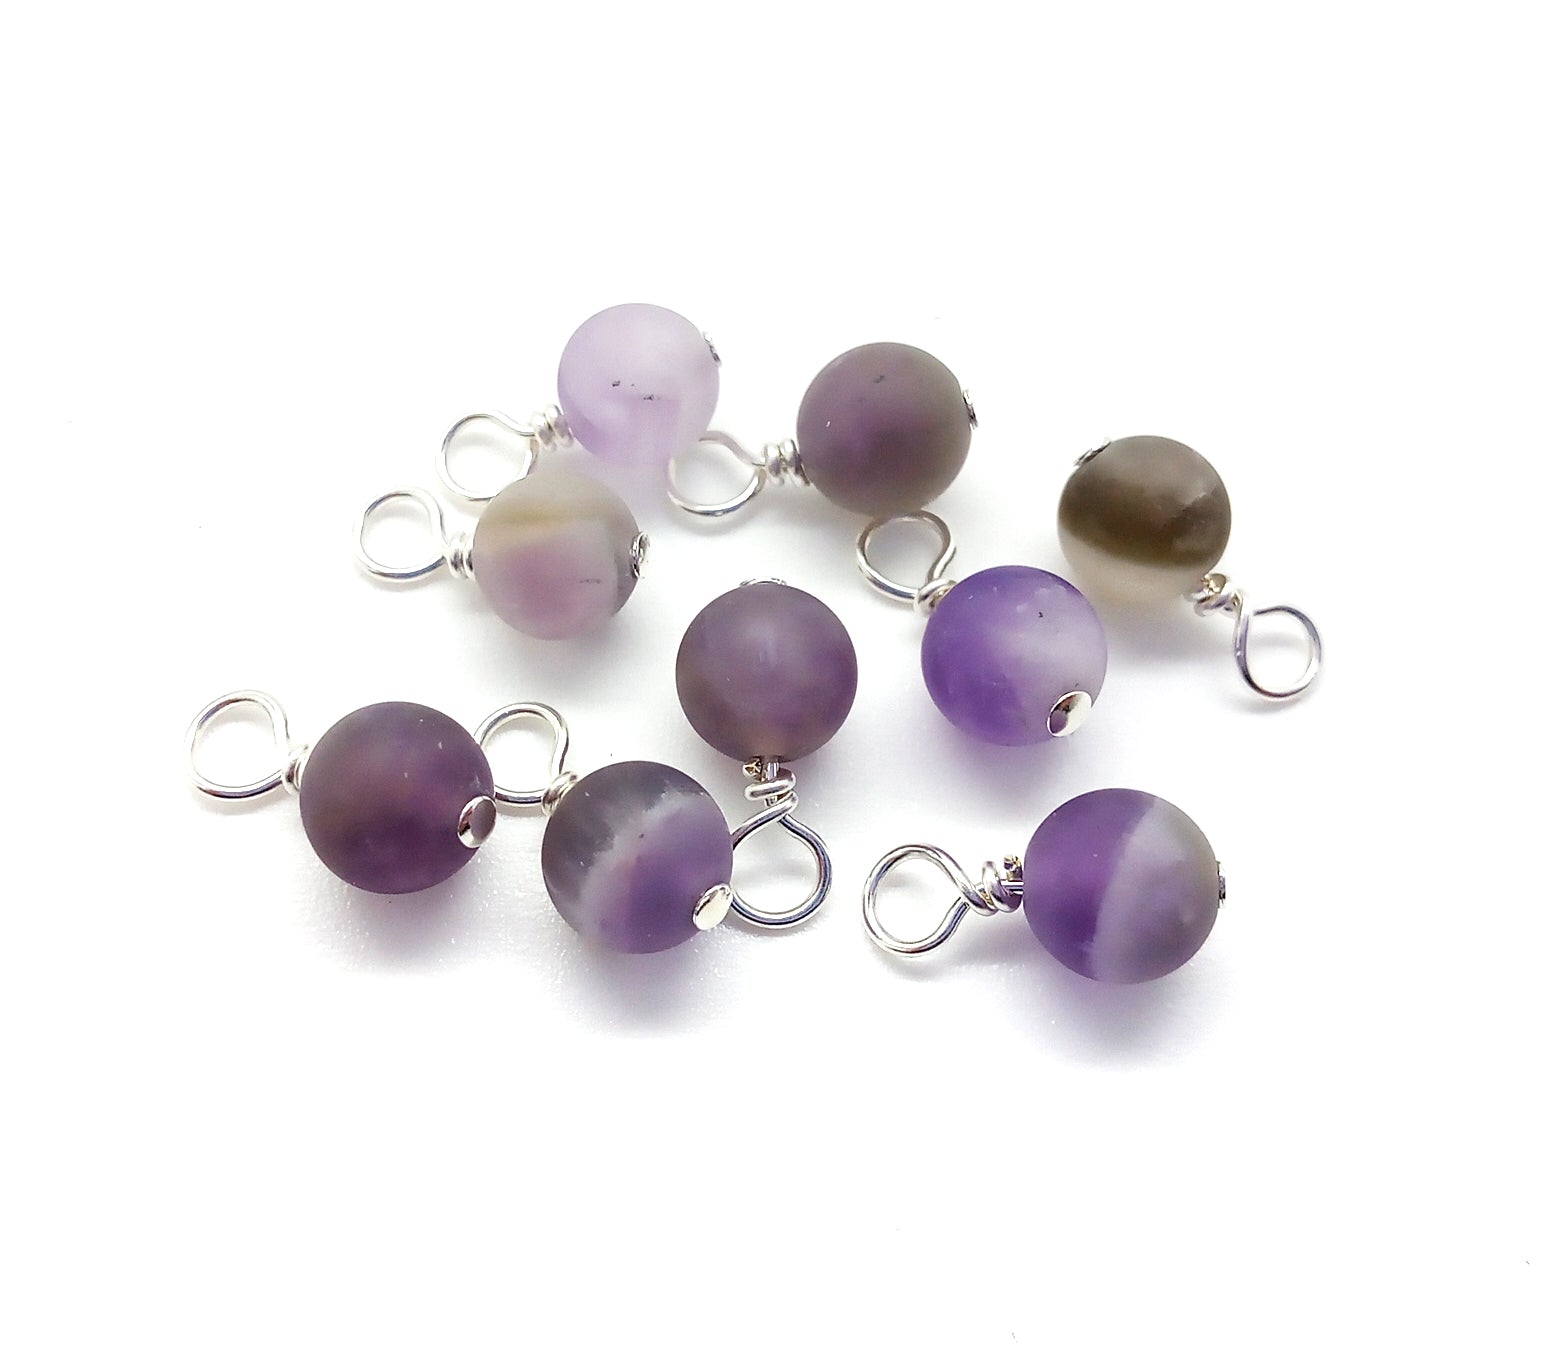 Amethyst 6mm Bead Charms, A Grade, Flower or Matte Gemstone Dangles - Adorabilities Charms & Trinkets